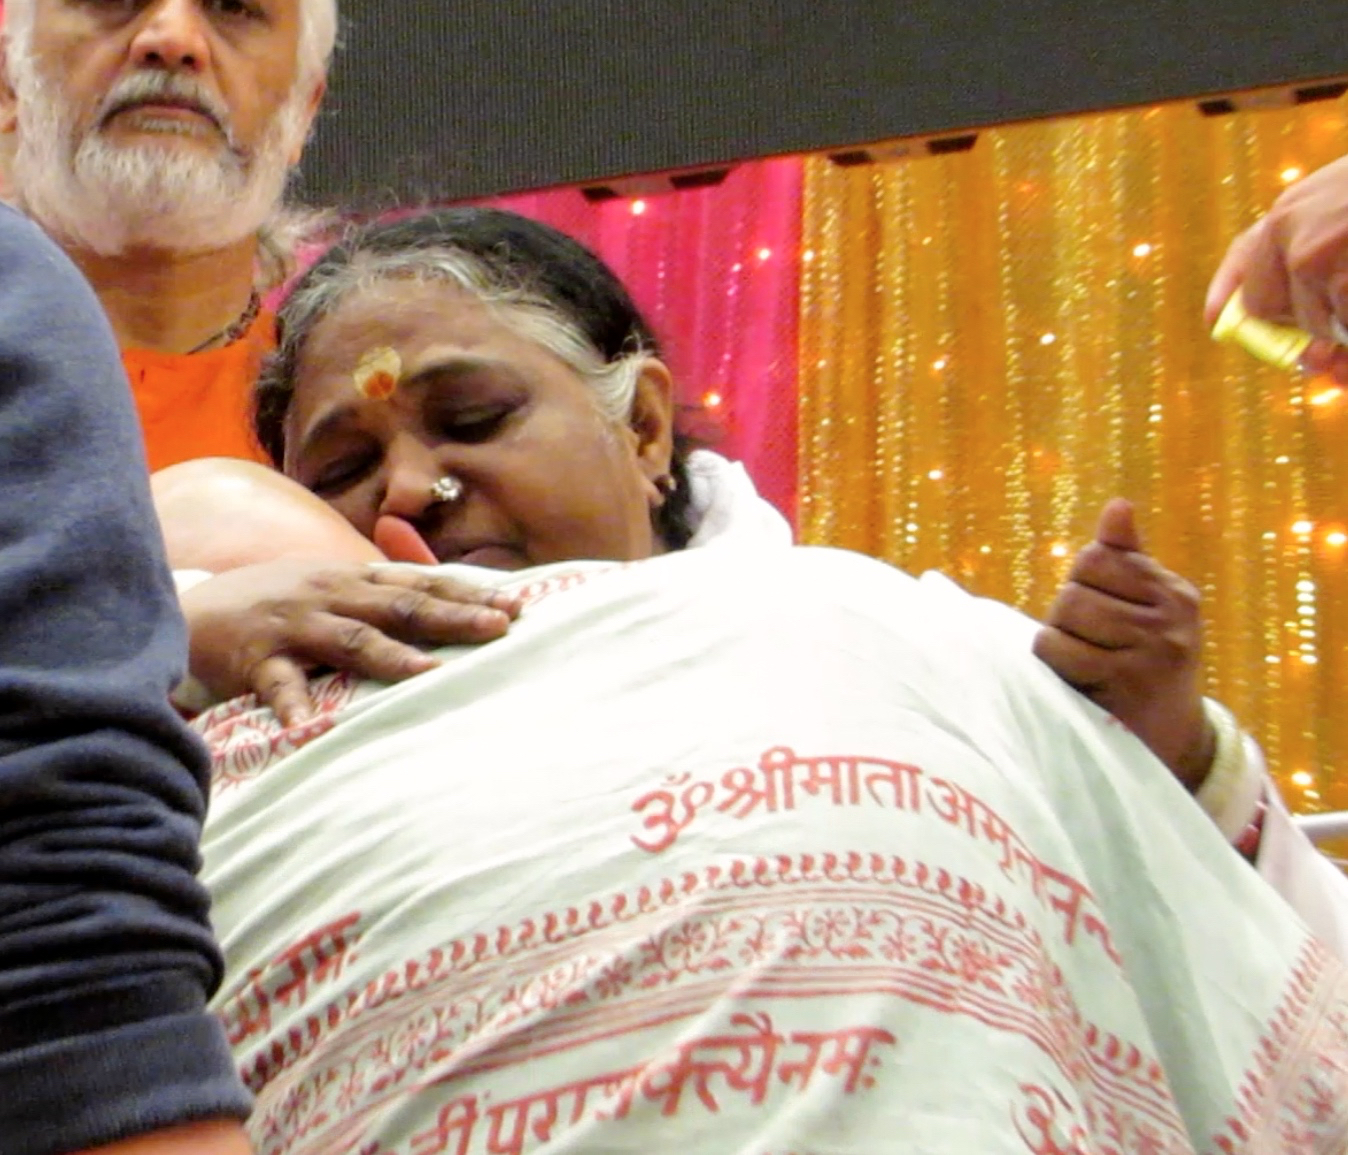 Amma "The Hugging Saint" blessed thousands with her embrace in Los Angeles